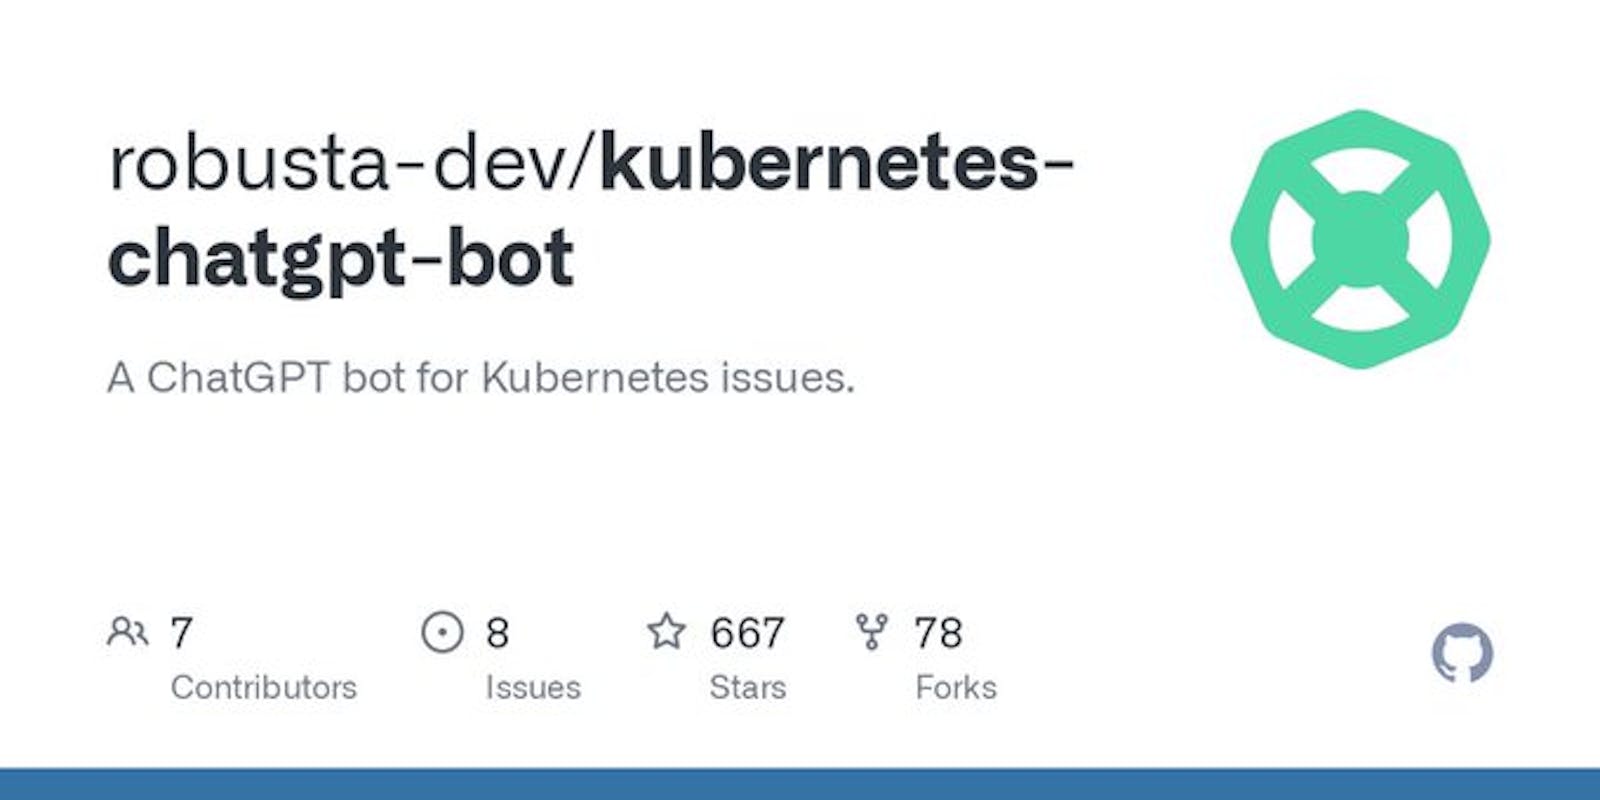 Cover Image for Speed up Kubernetes incident resolutions using AI